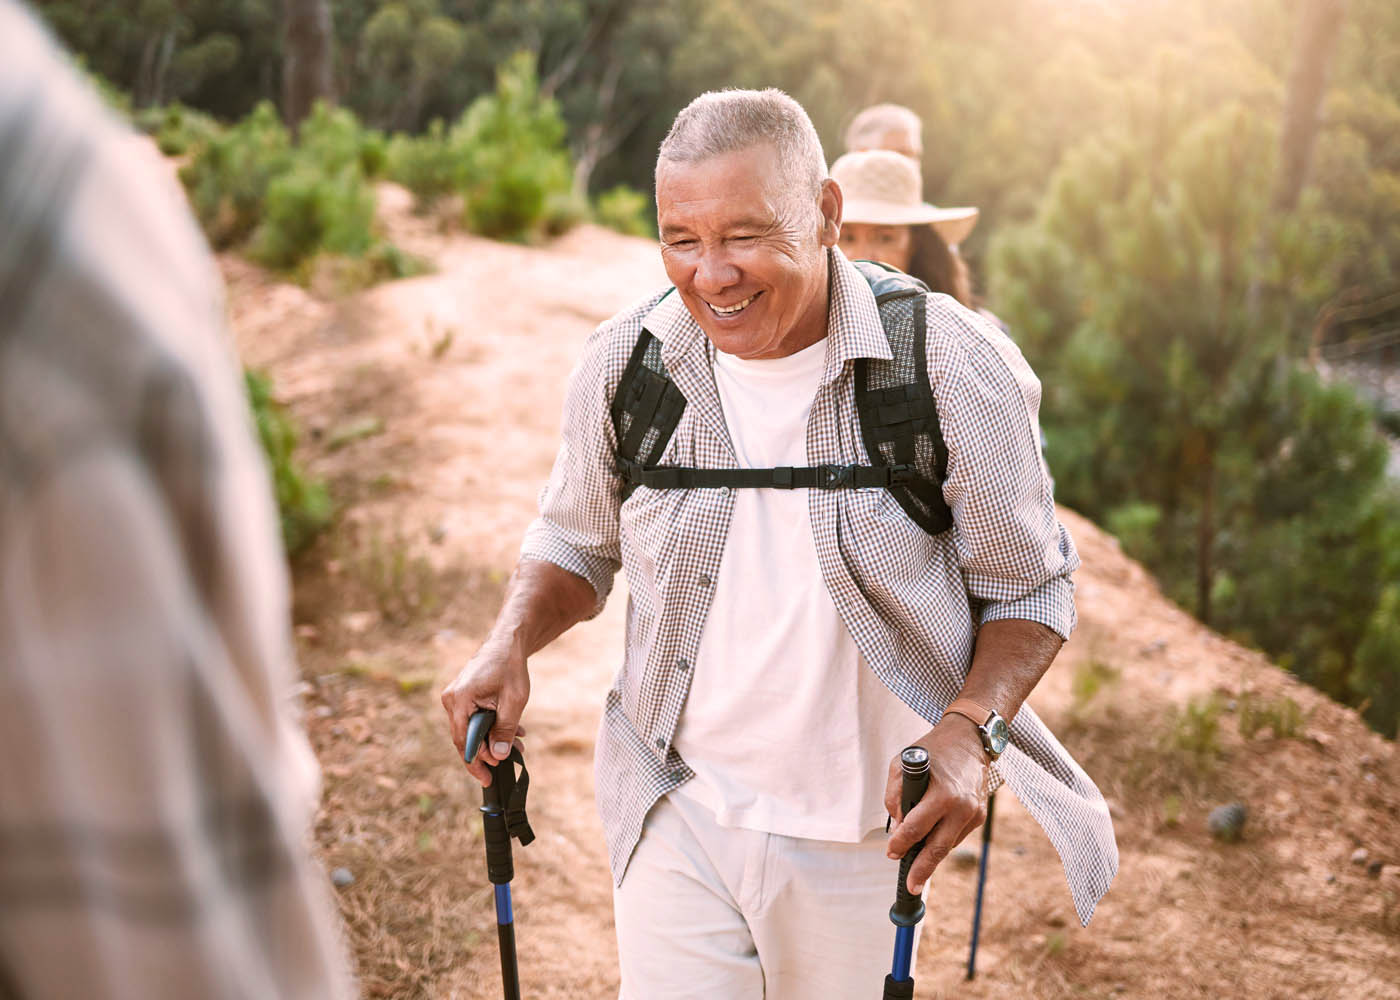 A man hiking with his wife free of pain after visiting Light Lounge's chronic pain treatment center in Lehi, UT.